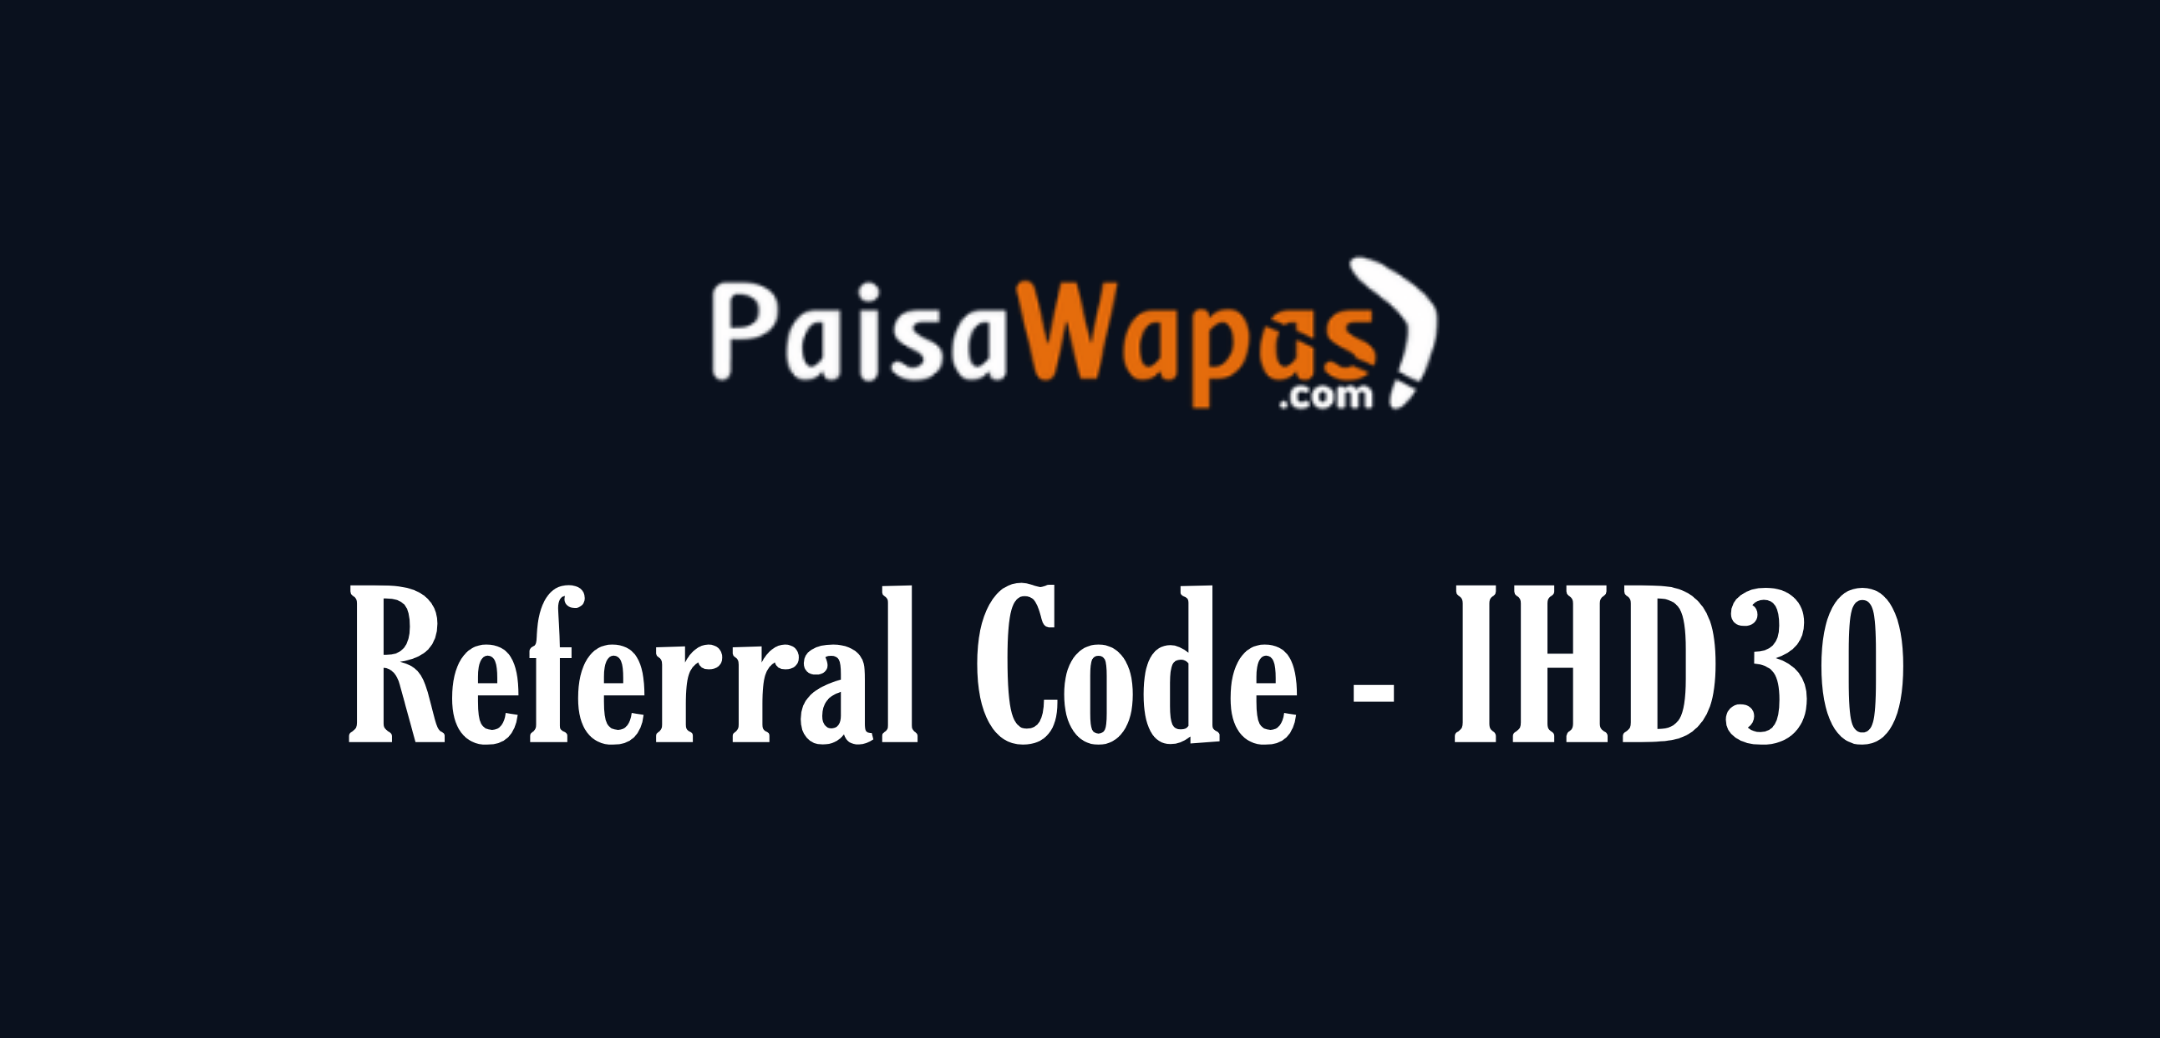 PaisaWapas Referral Code 2020 - IHD30 | Get ₹30 On Sign Up ...